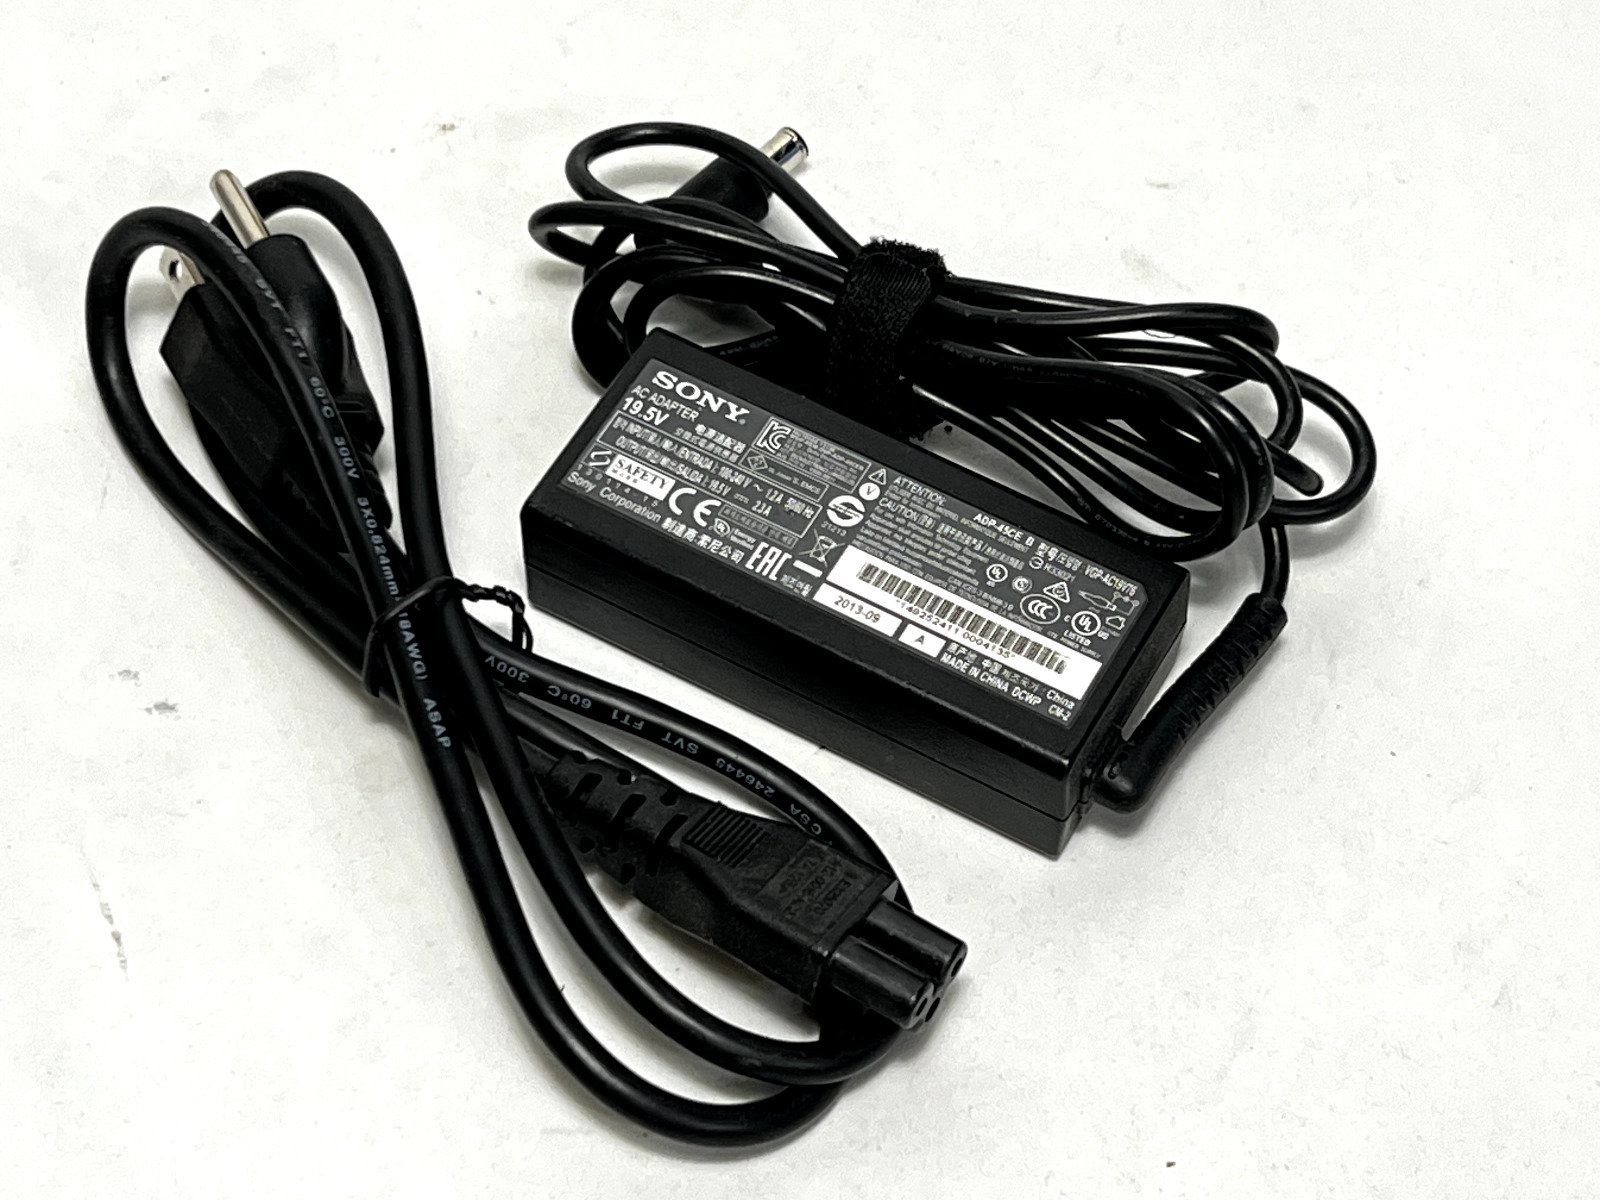 Genuine Sony Laptop Charger AC Adapter Power Supply VGP-AC19V76 ADP-45CE B 45W